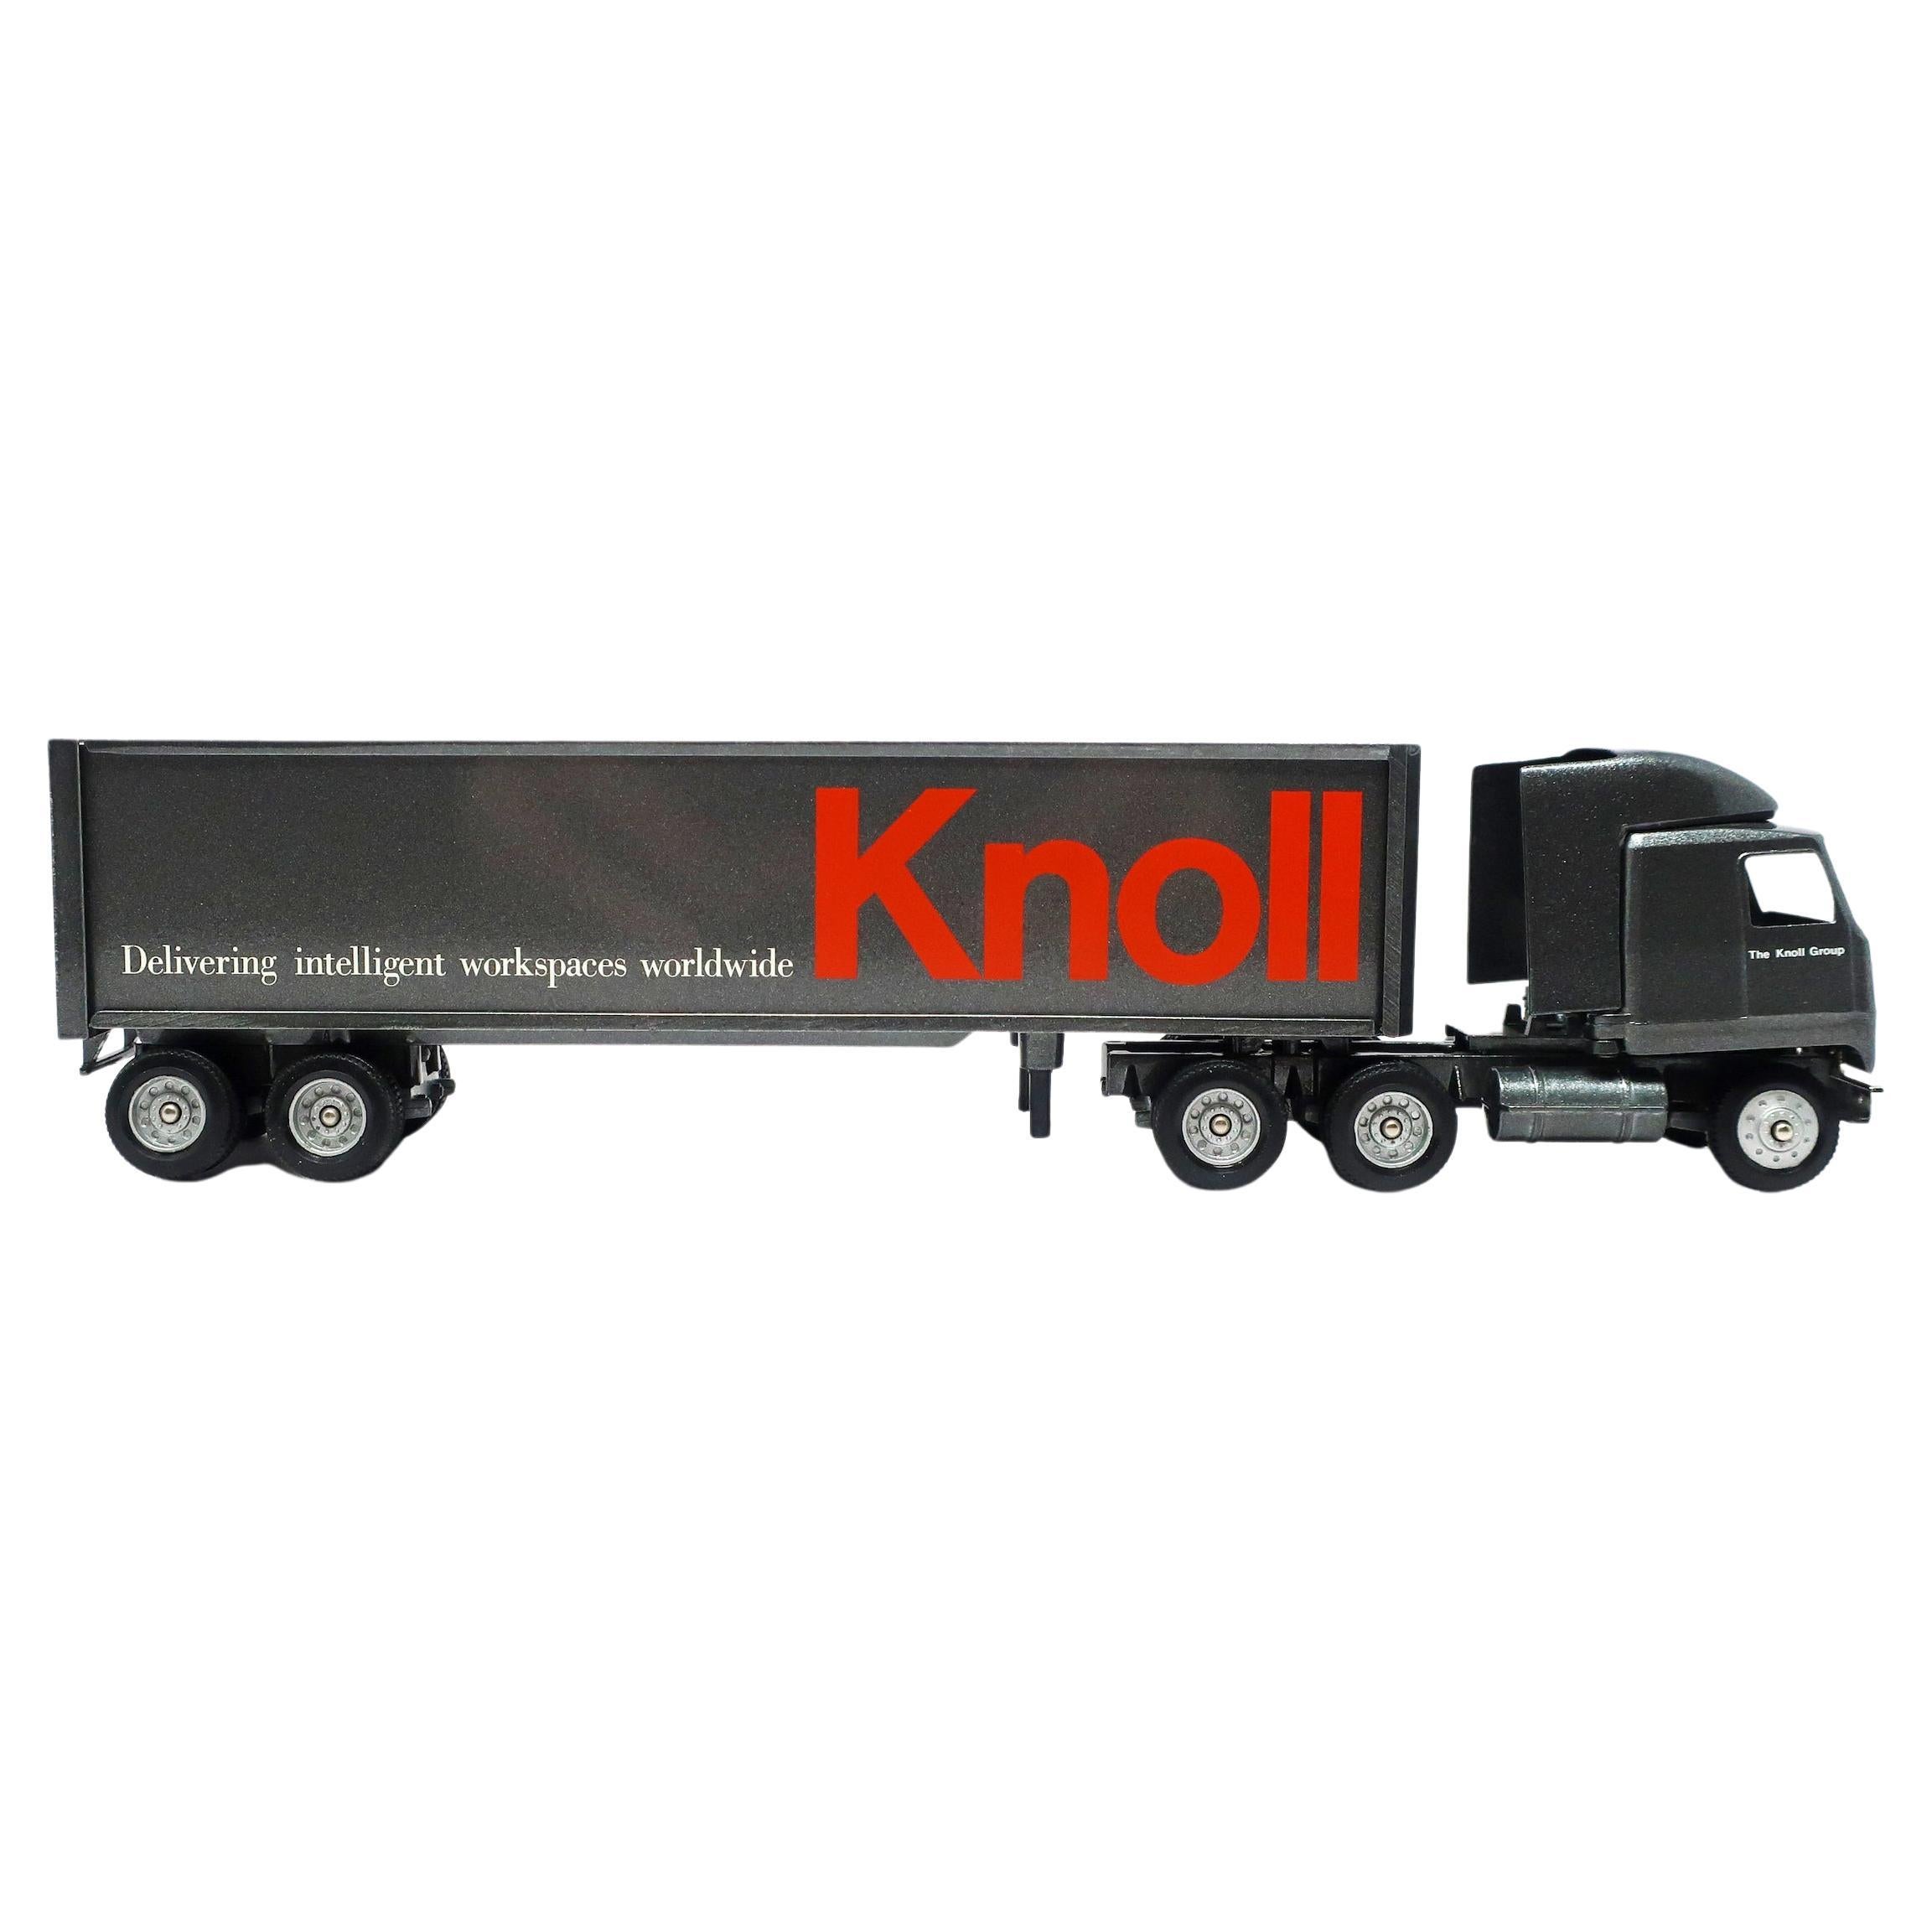 A fun Knoll Furniture miniature die-case truck made by Winross. Likely a collectible item given to Knoll employees, it is a 1:64 scale model with removable cab and trailer with metal and plastic parts. Charcoal grey paint on cab and trailer with